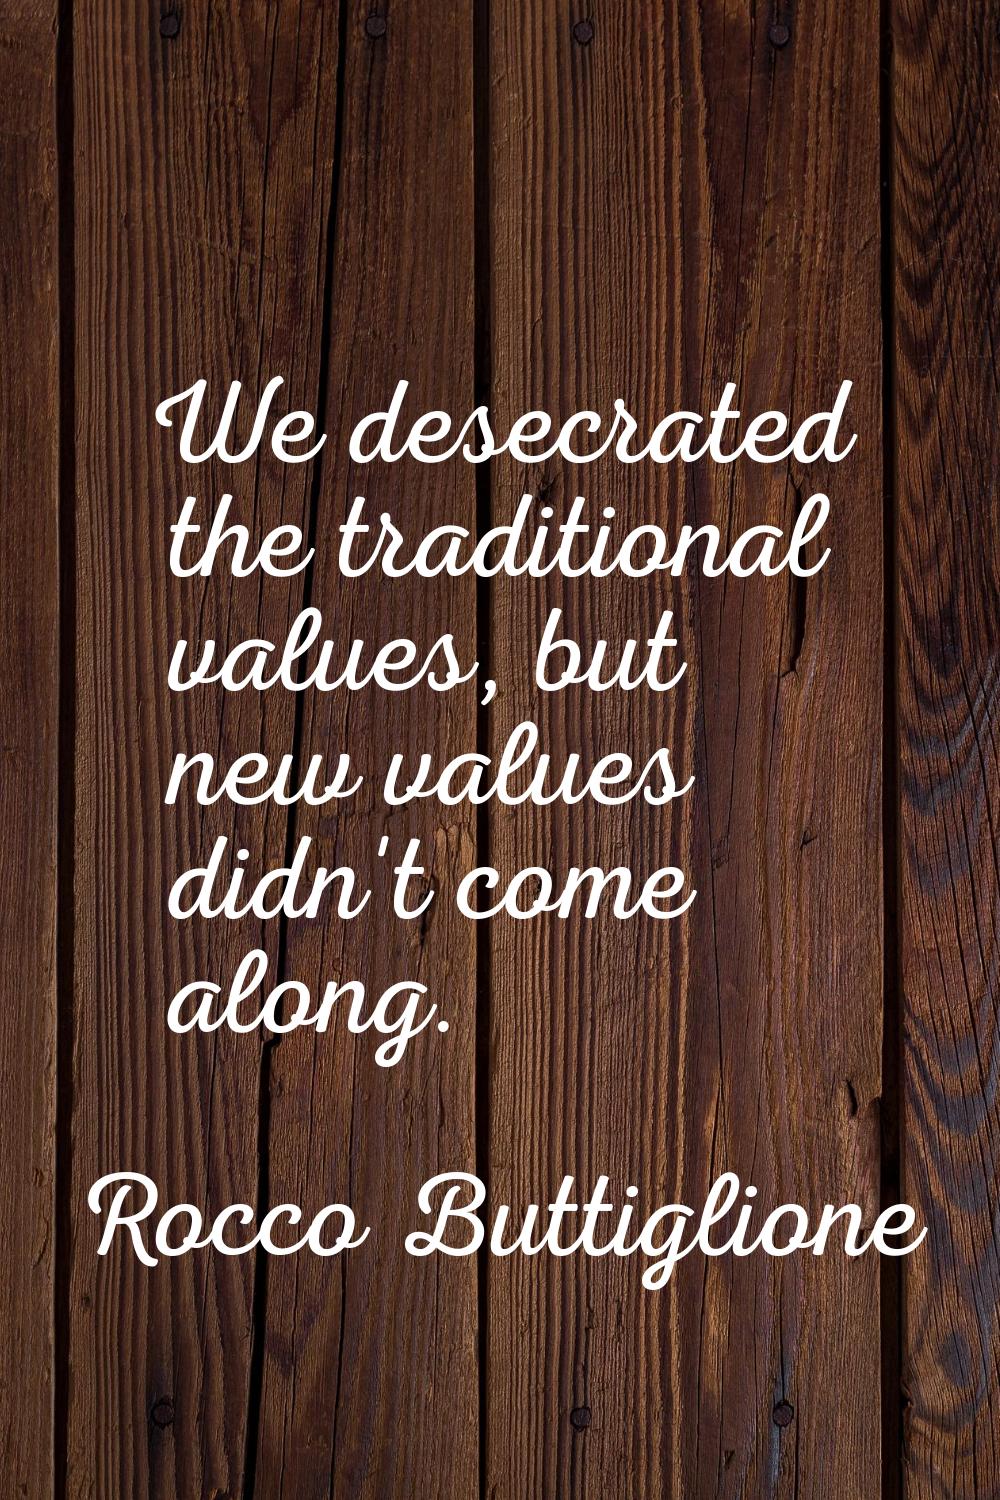 We desecrated the traditional values, but new values didn't come along.